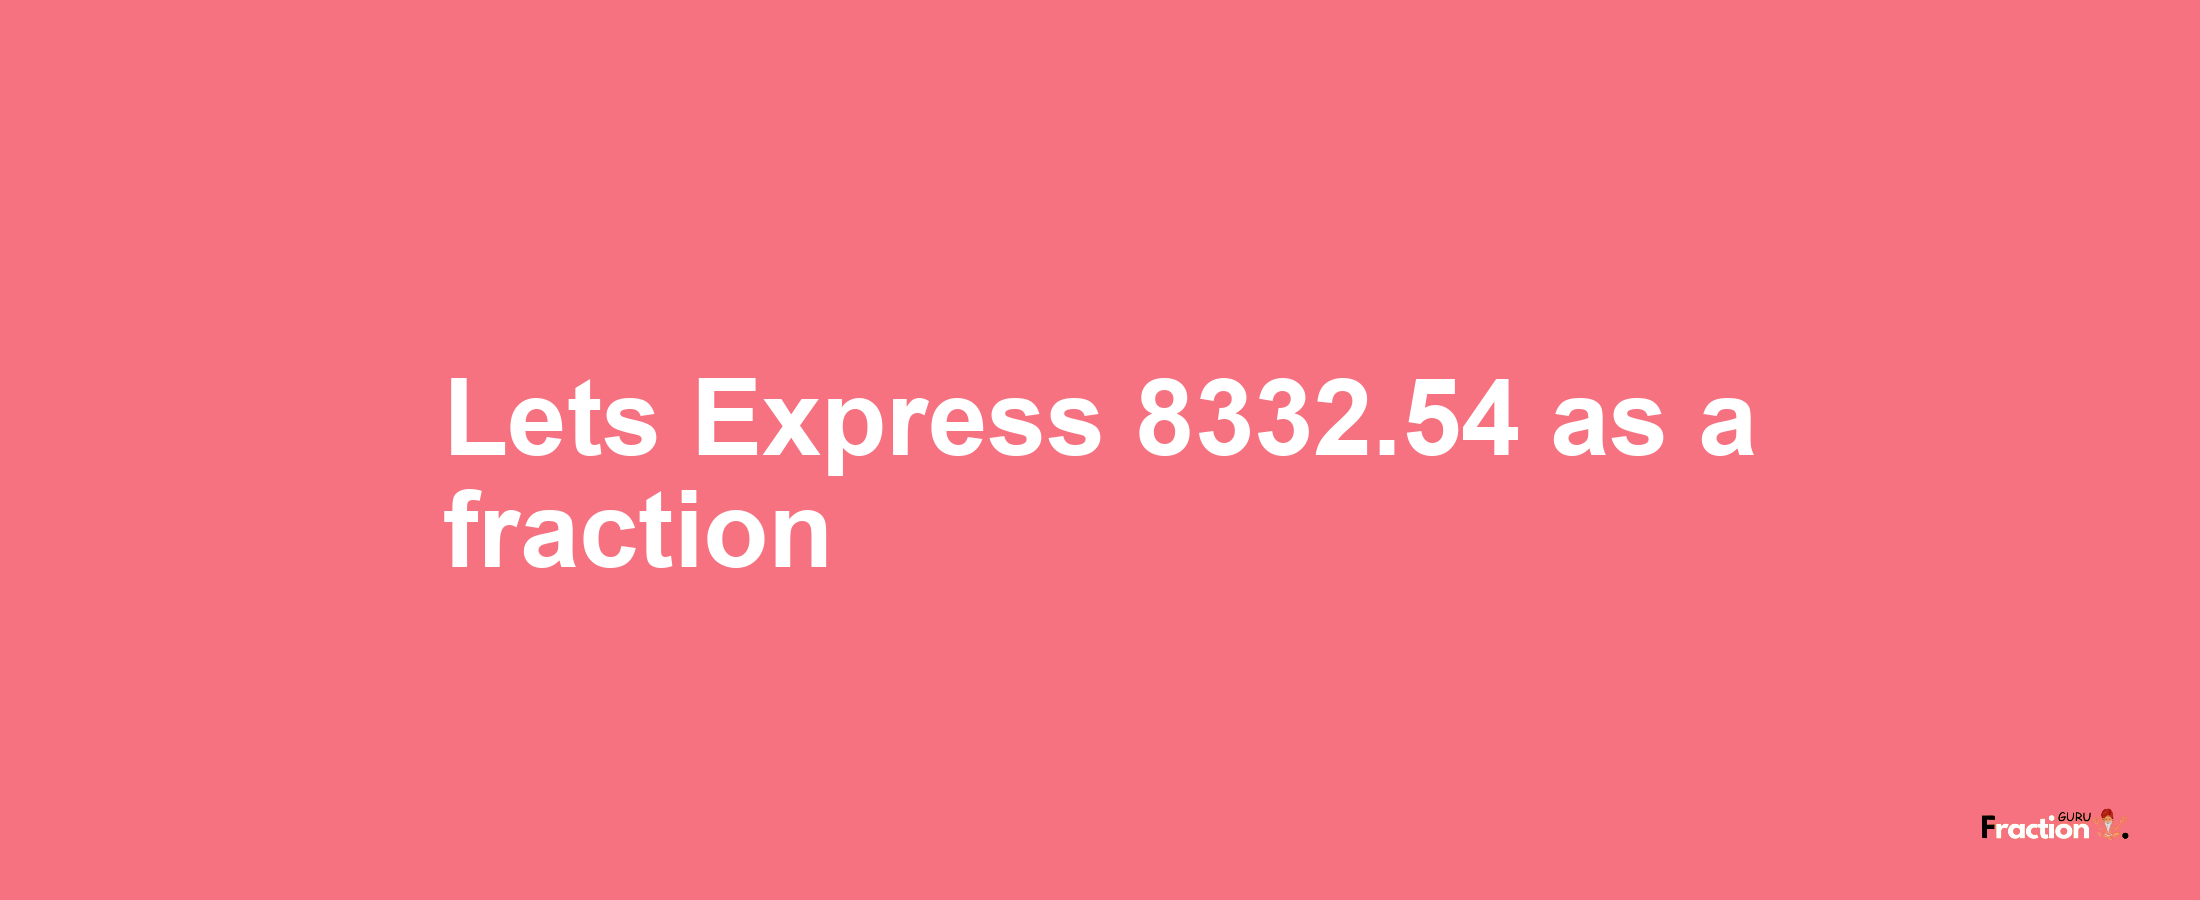 Lets Express 8332.54 as afraction